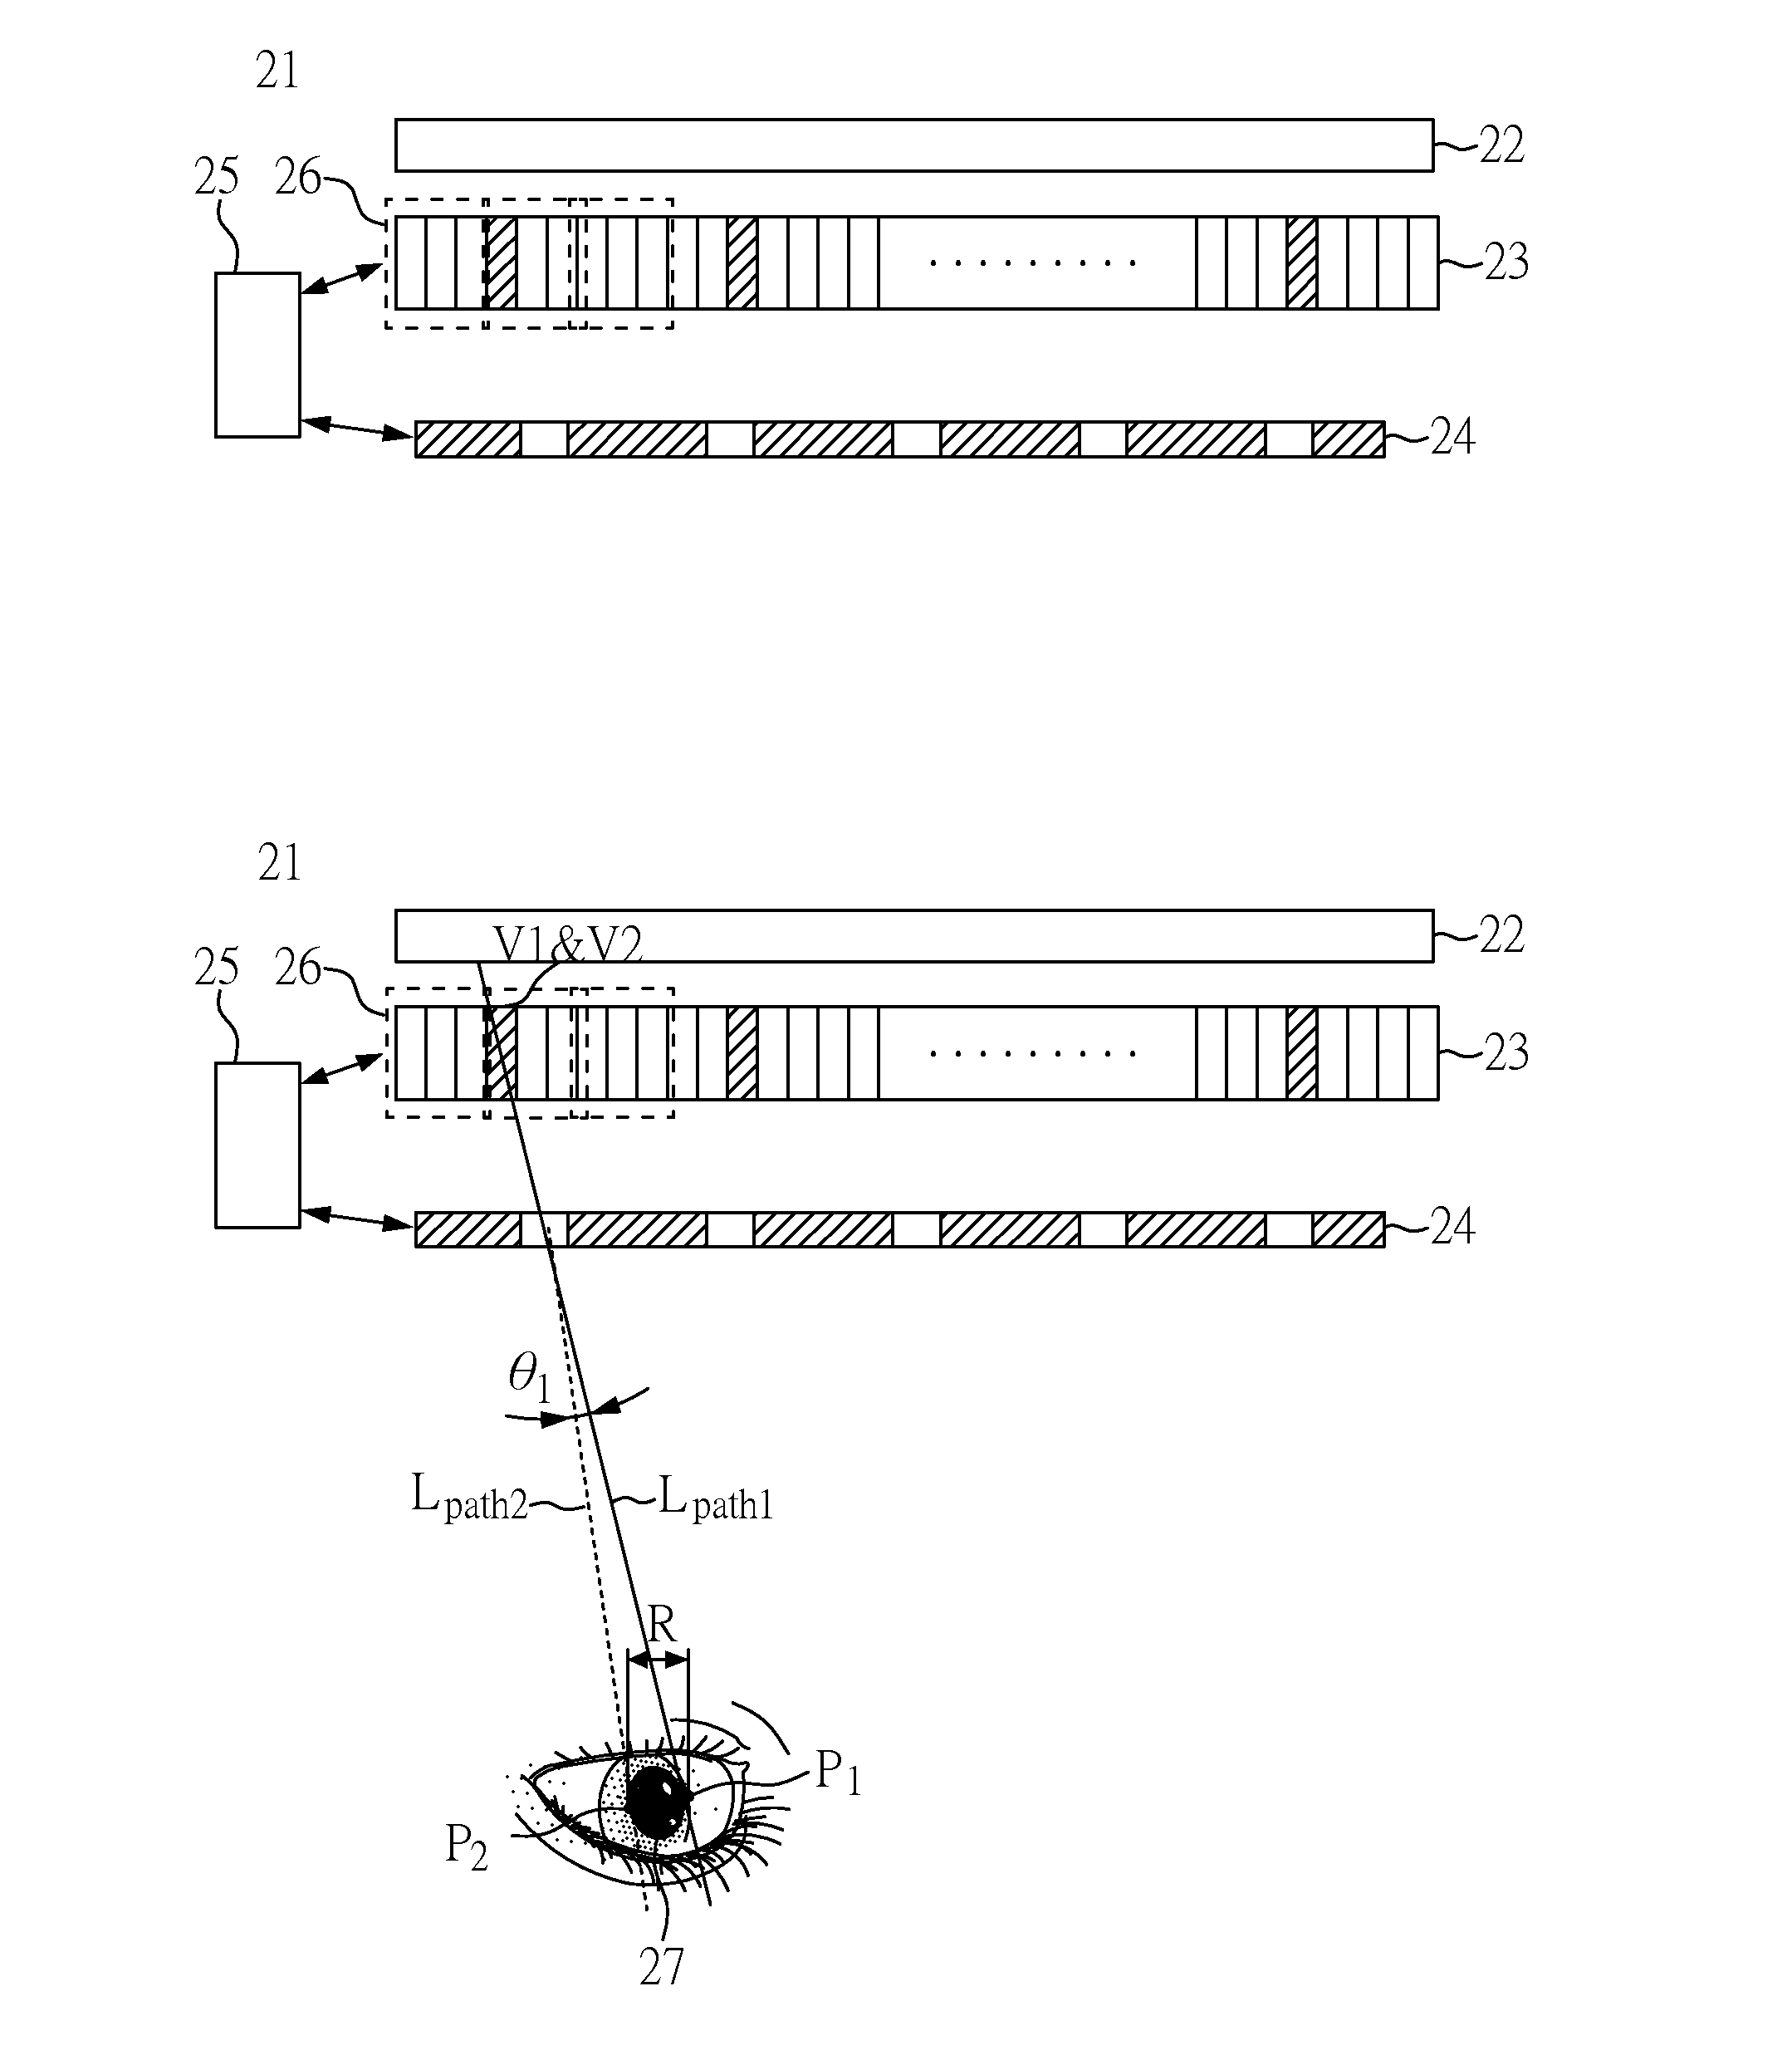 3D image display device